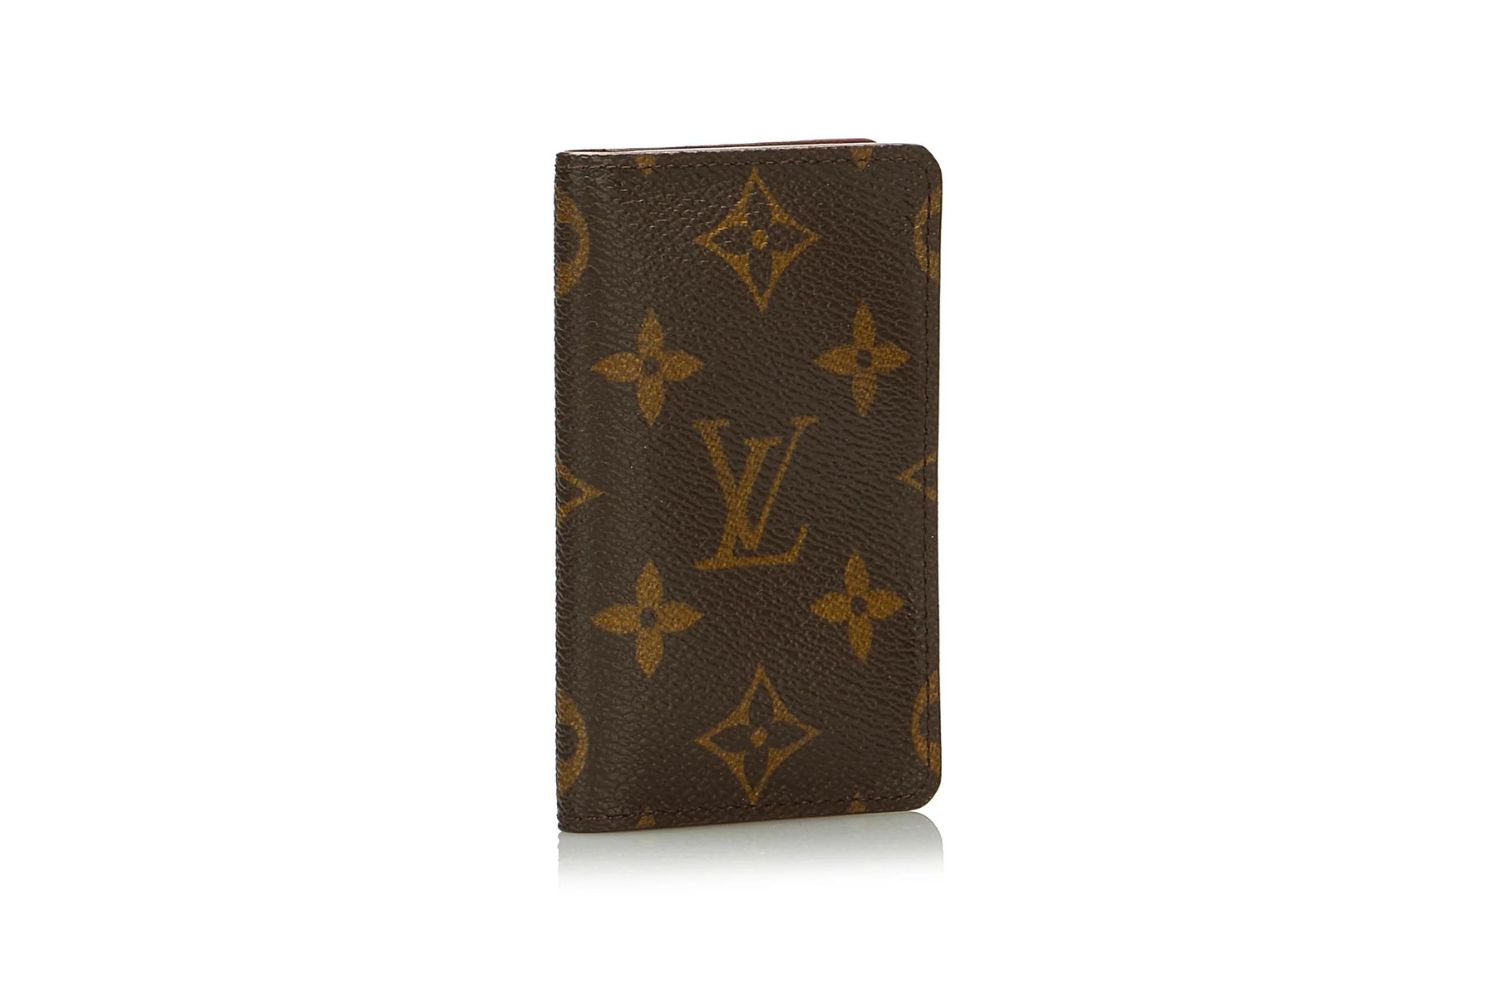 11-captivating-facts-about-louis-vuitton-card-holder